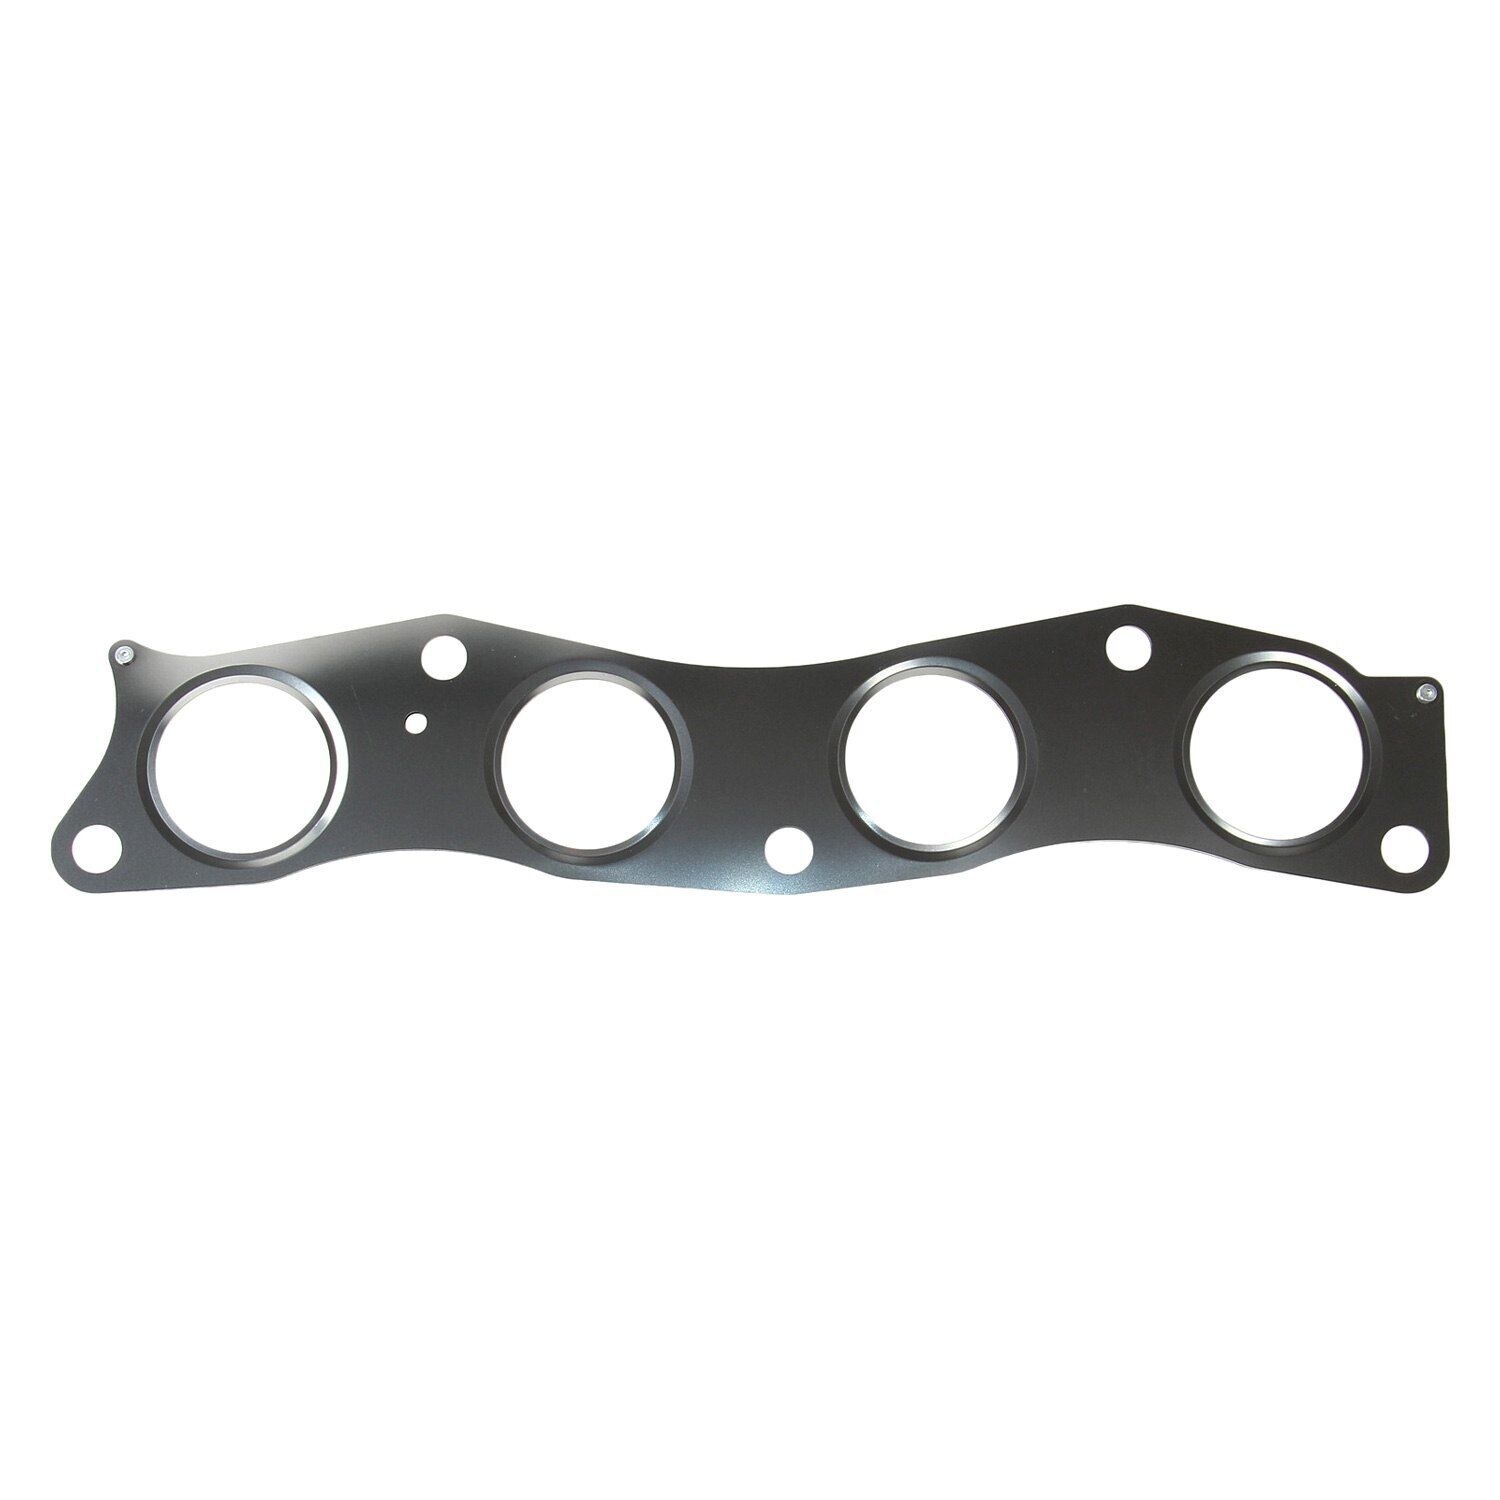 For Nissan Maxima 1995-2001 Stone Exhaust Manifold Gasket